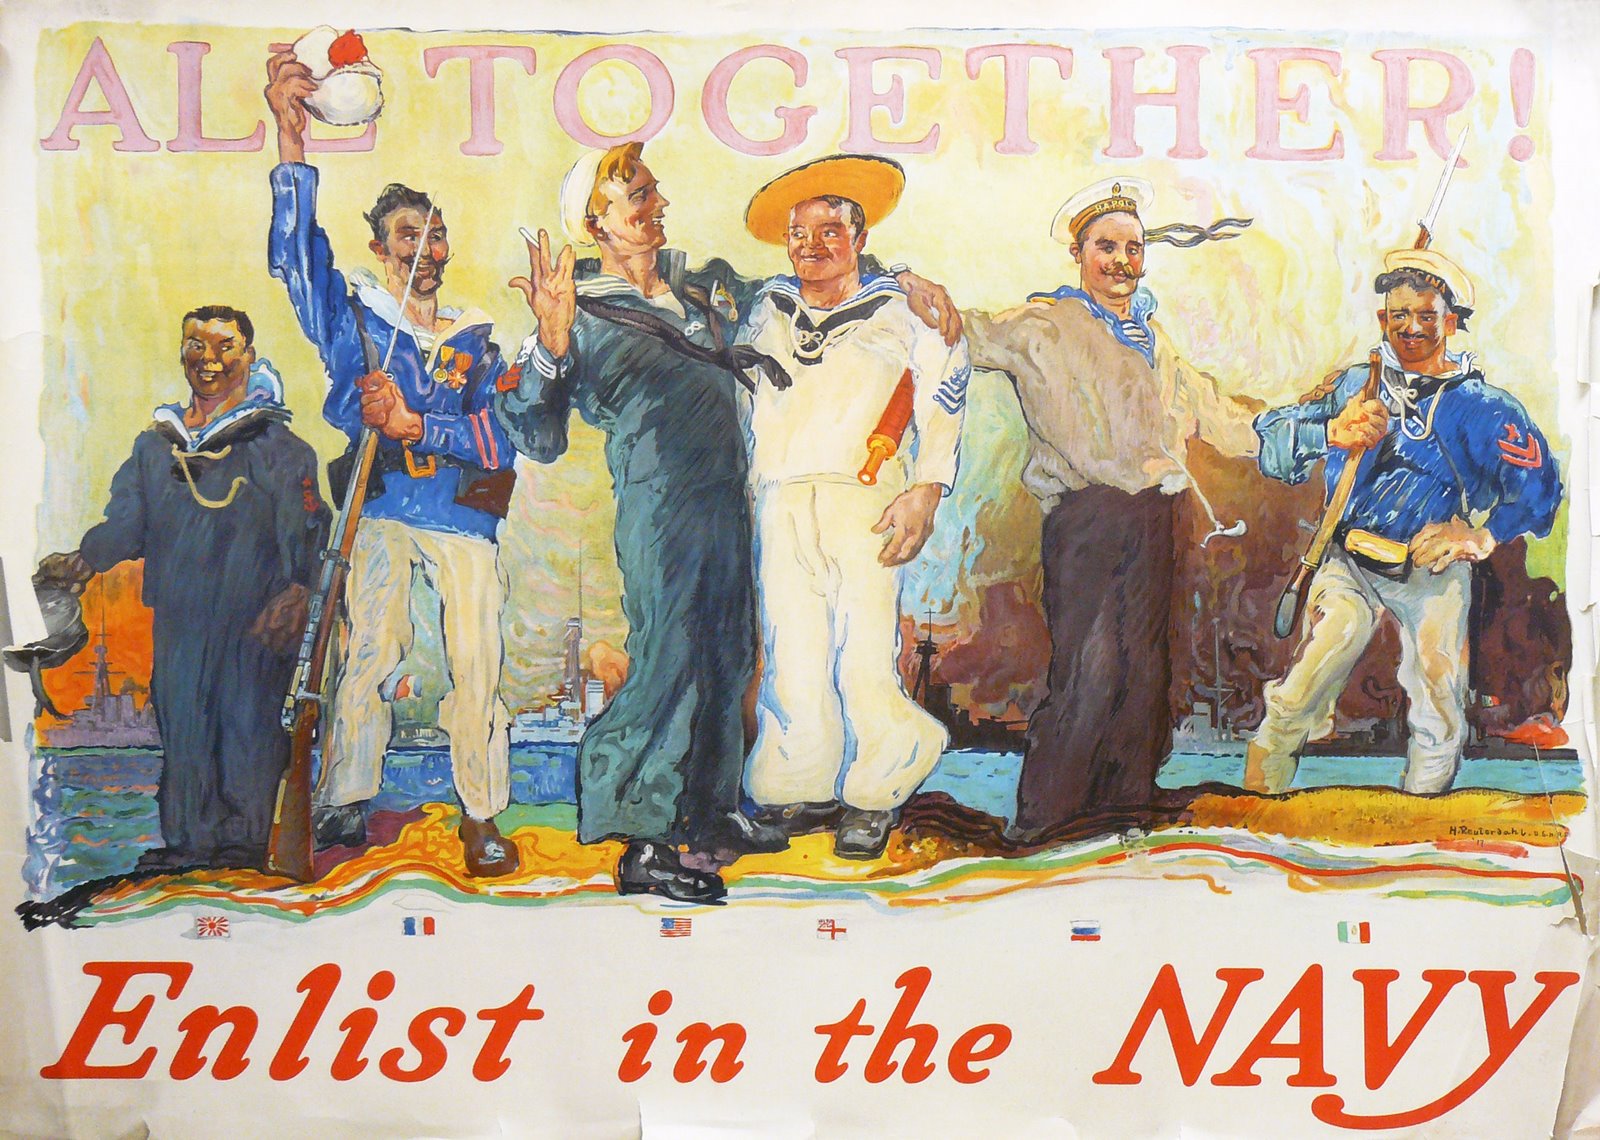 Illustration of various Navy men standing together, text: All together! Enlist in the Navy